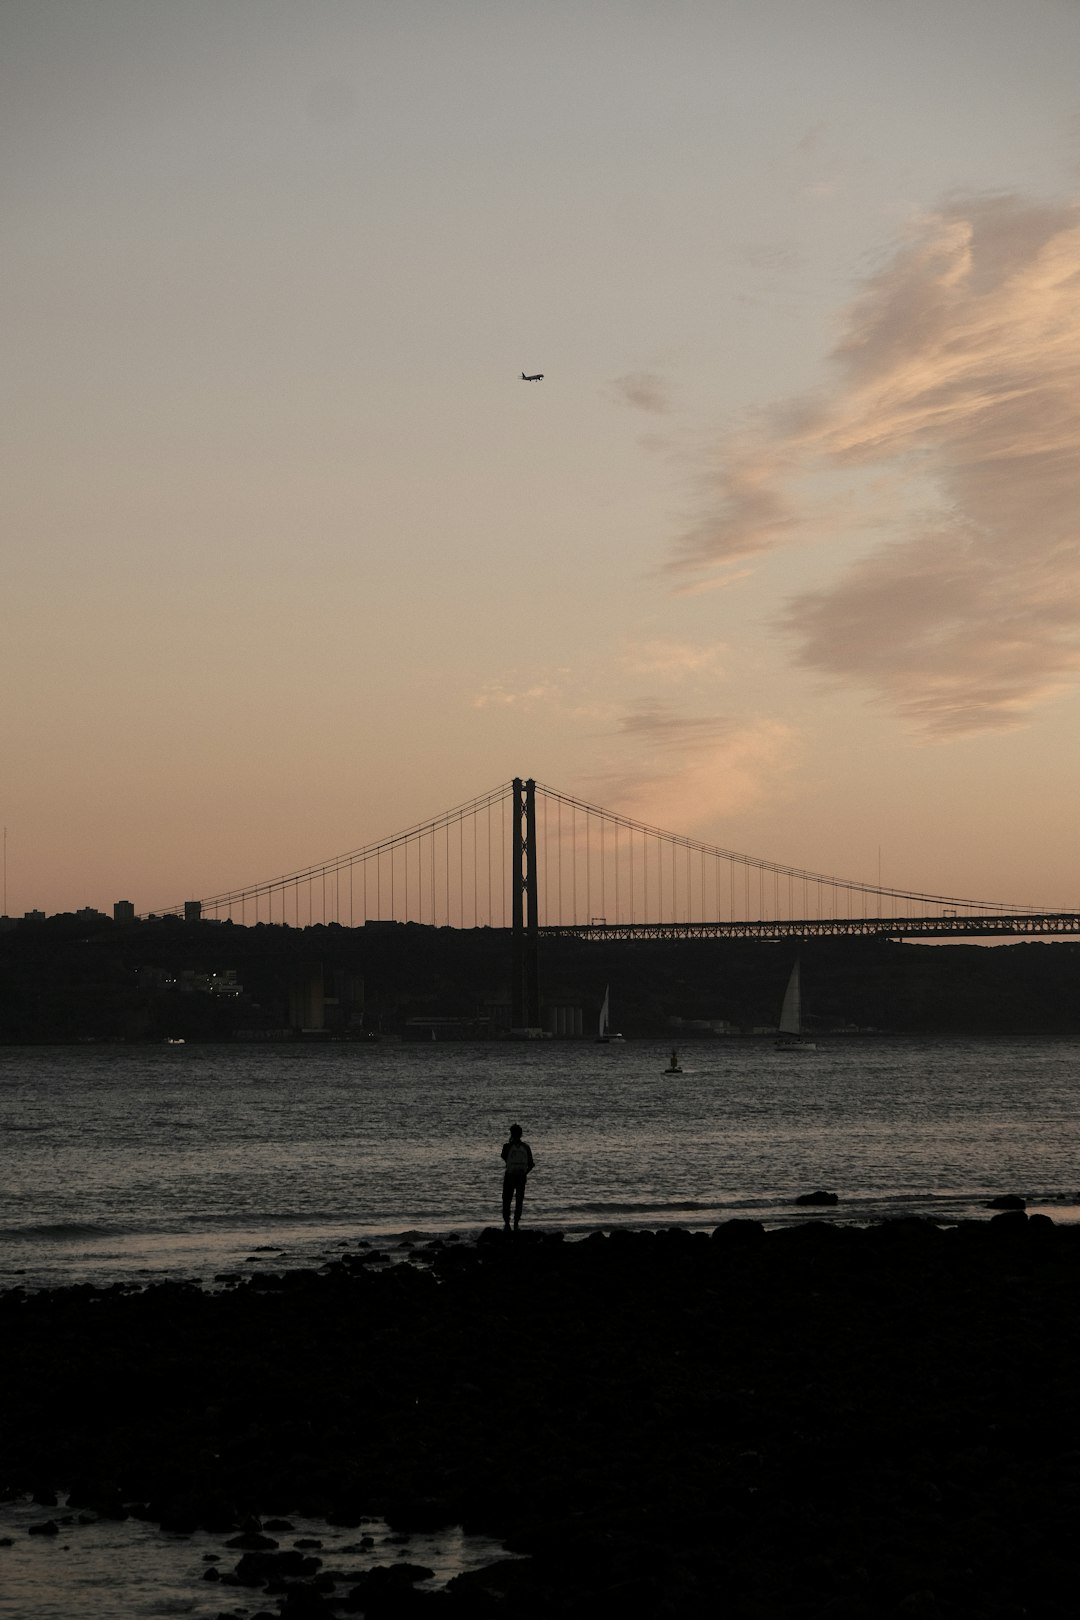 silhouette of person standing on seashore near bridge during sunset